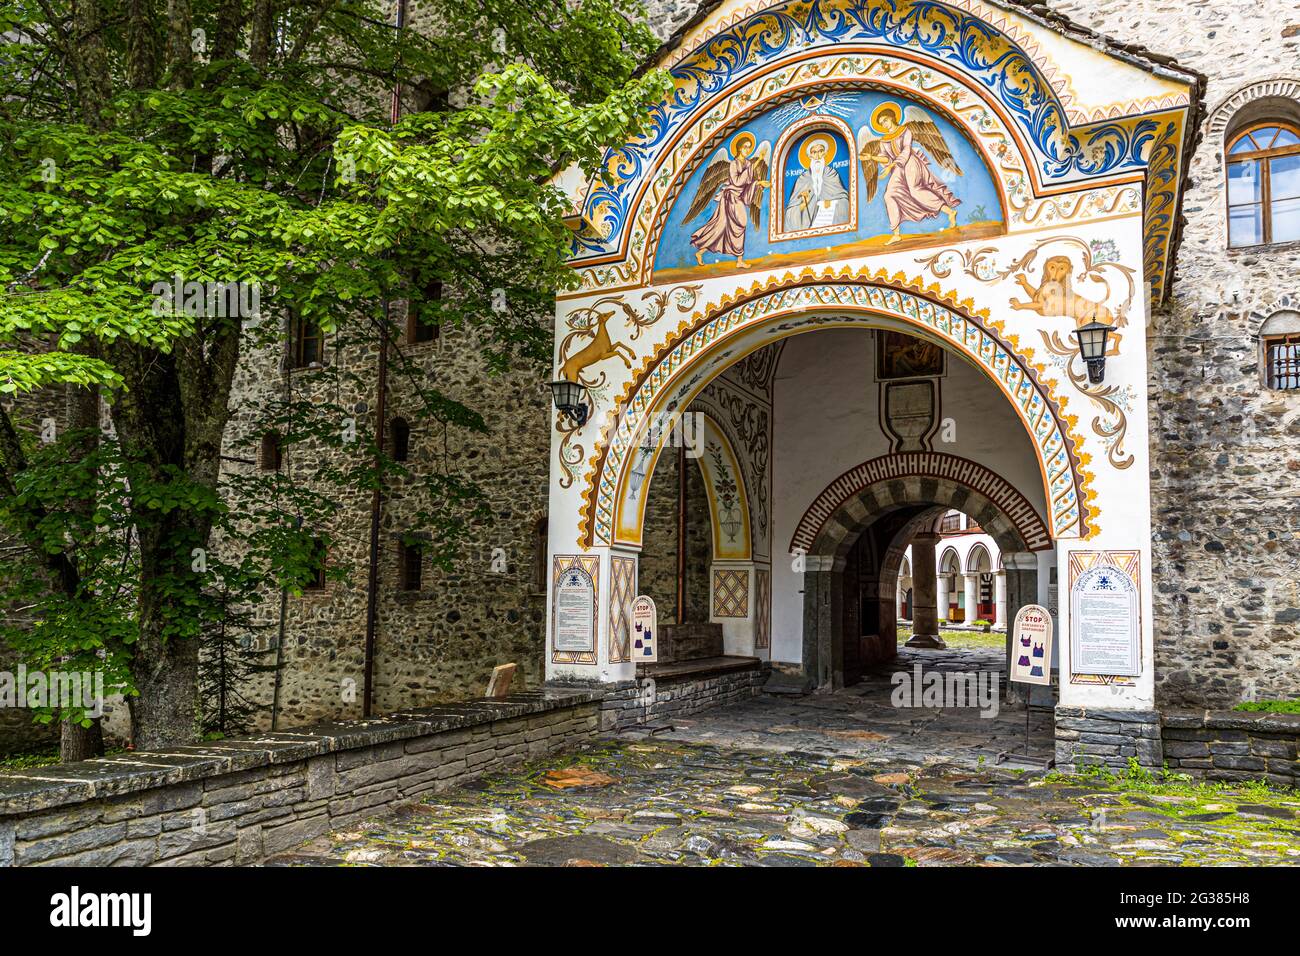 The Monastery of Saint Ivan of Rila, better known as the Rila Monastery (Bulgarian: Рилски манастир, Rilski manastir) is the largest and most famous Eastern Orthodox monastery in Bulgaria.It belongs to the UNESCO World Heritage. Stock Photo